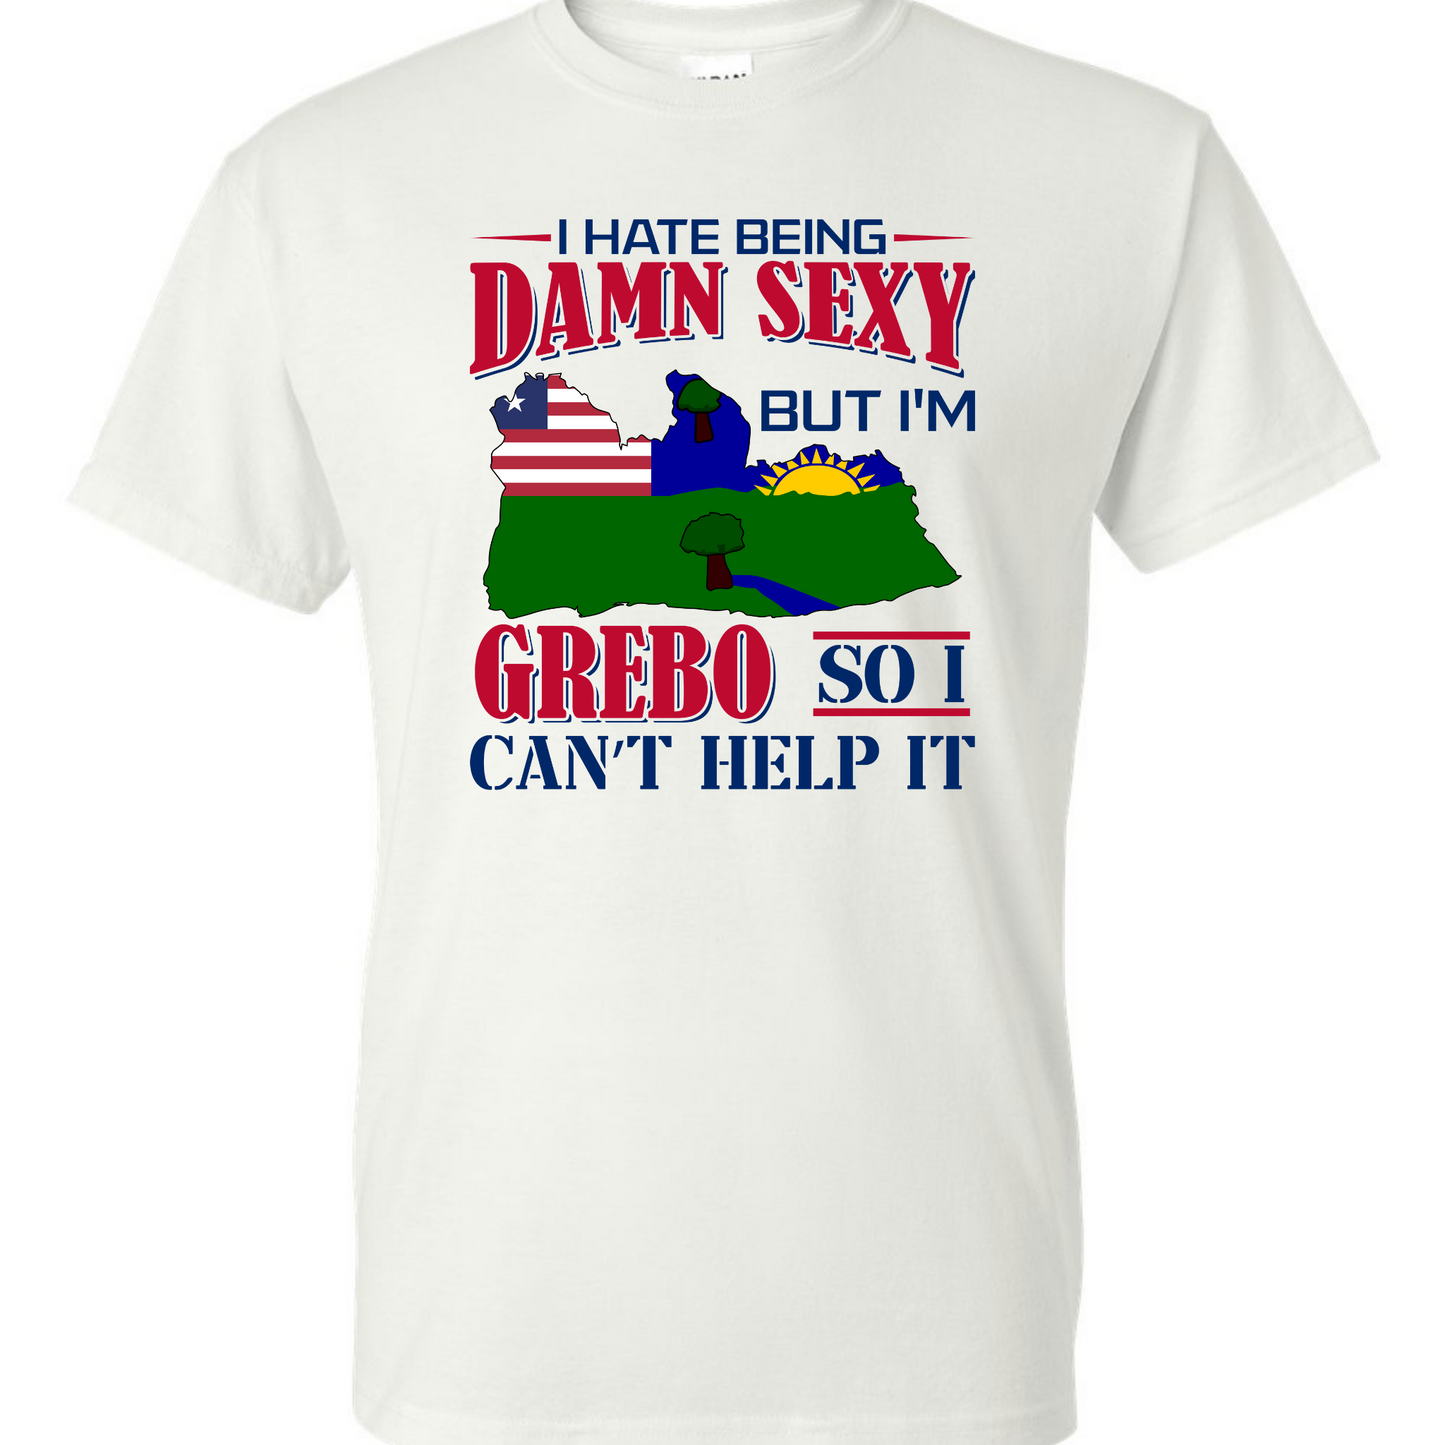 I Hate Being Damn Sexy But I'm -White T-Shirt